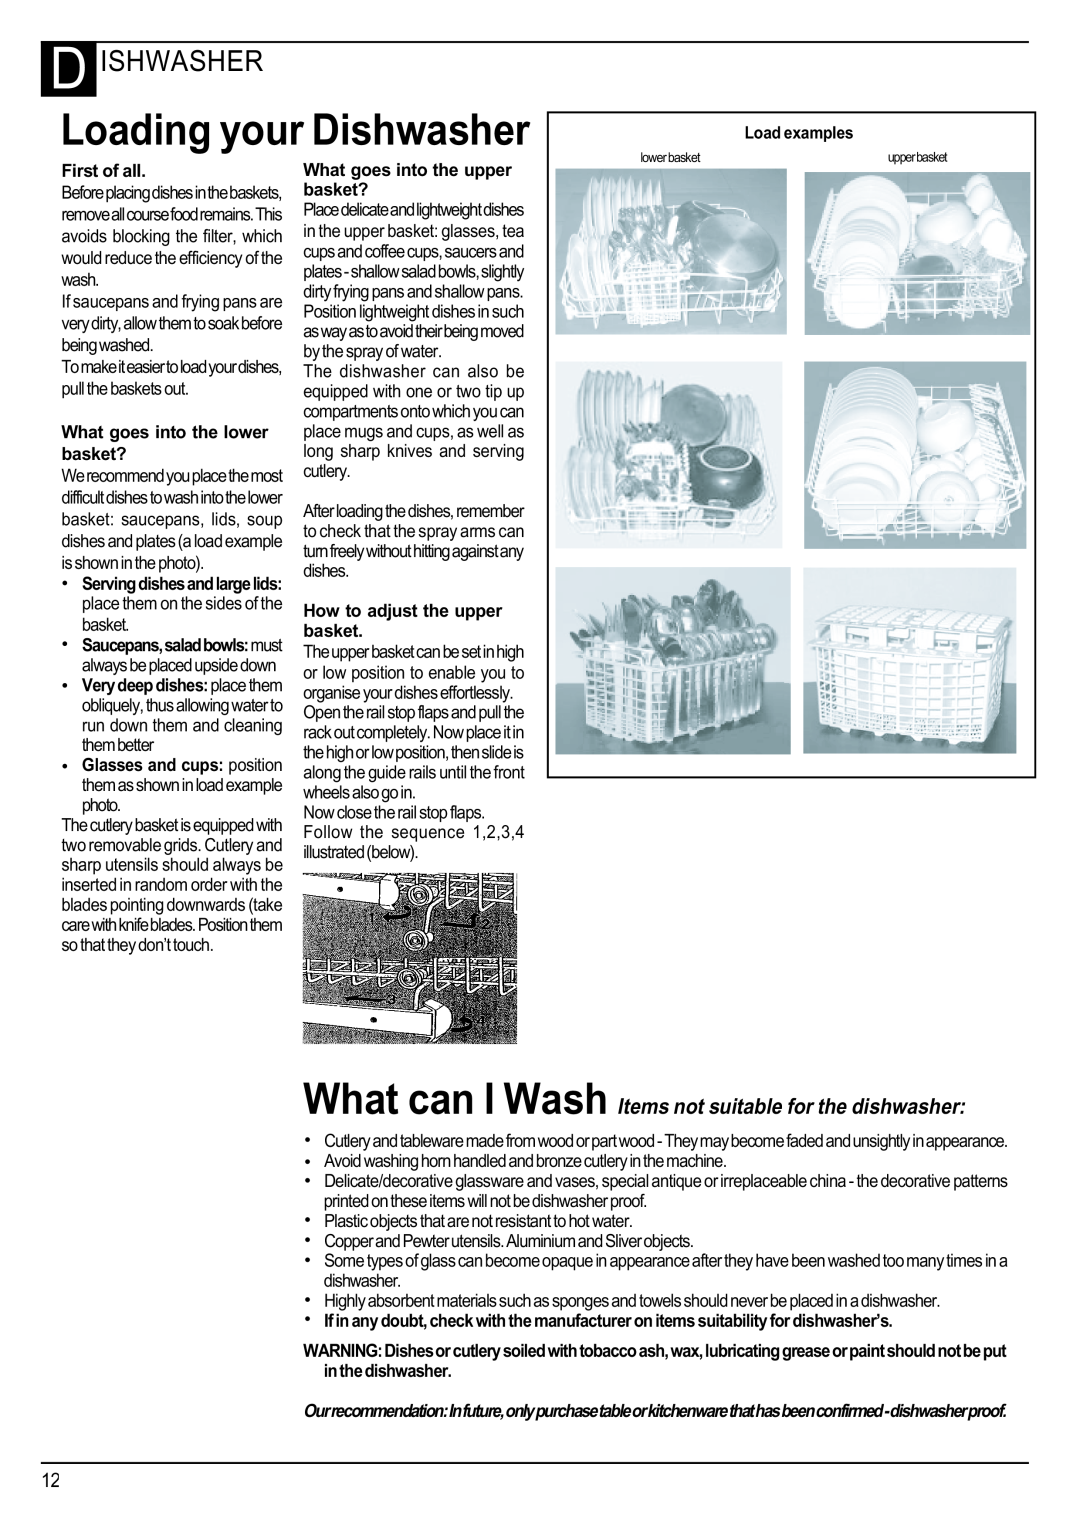 Hotpoint Instructions manual Loading your Dishwasher, D Ishwasher, What can I Wash Items not suitable for the dishwasher 